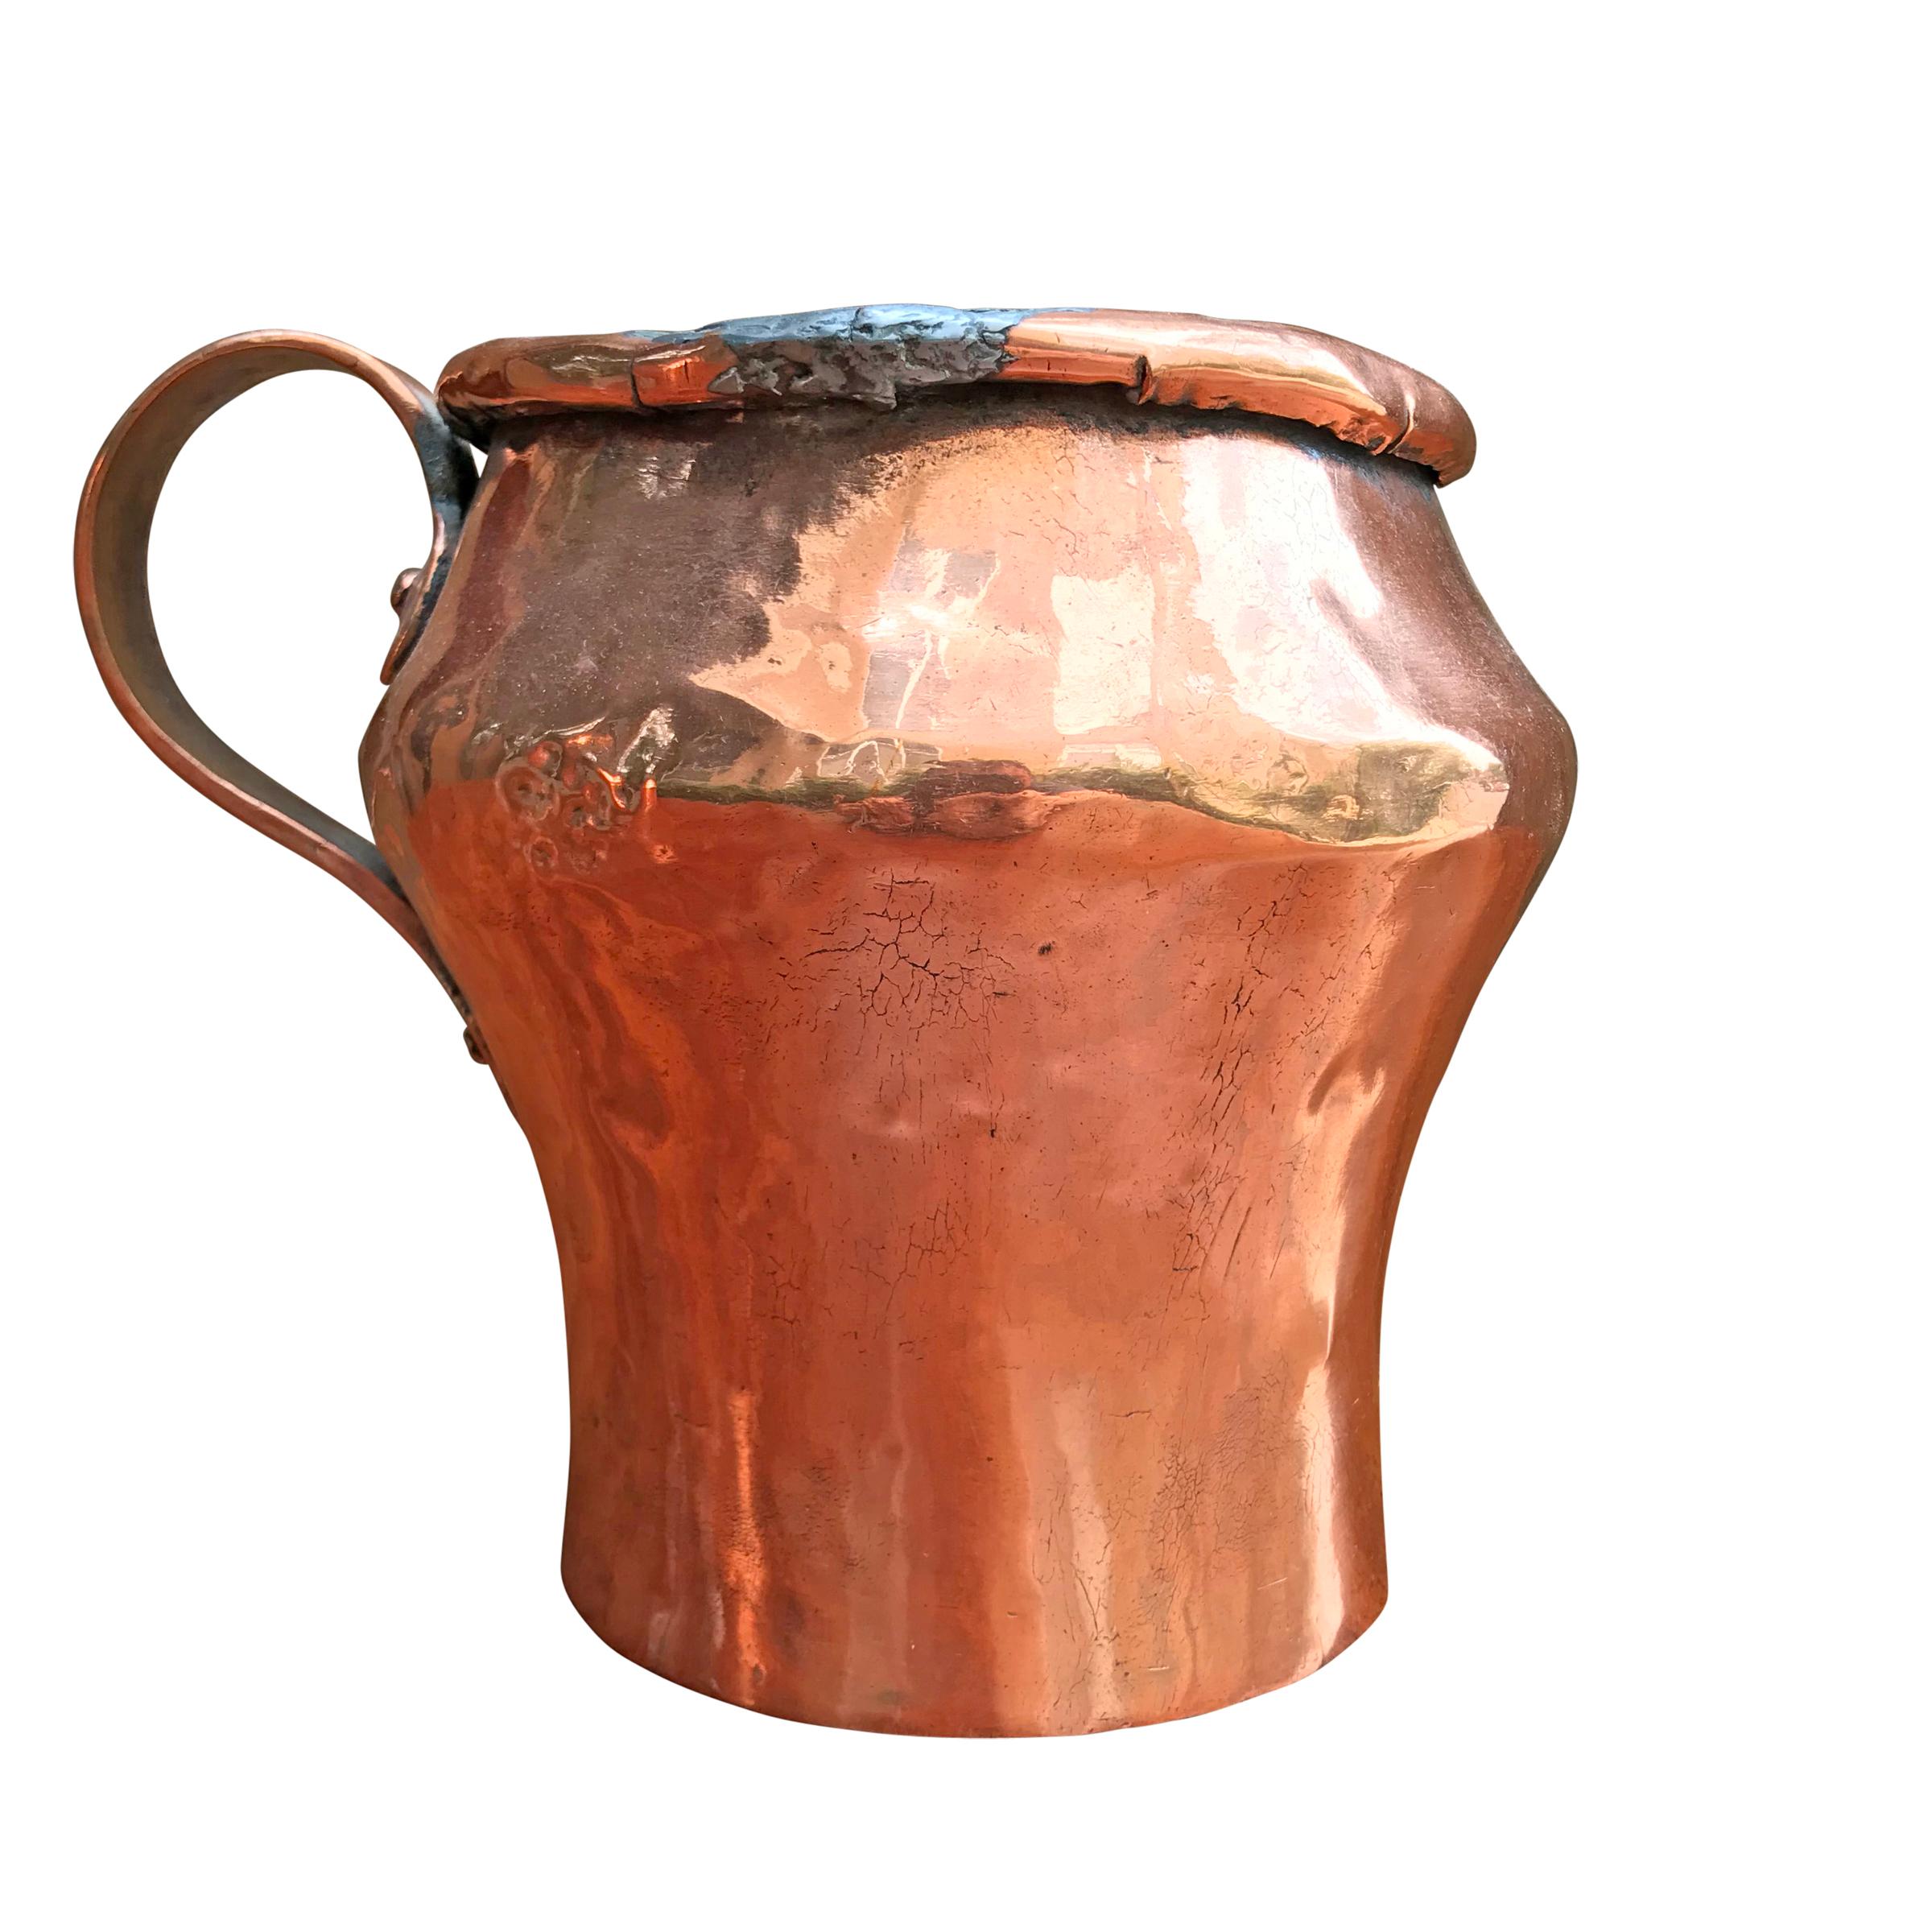 Pair of early 19th century English copper pitchers with riveted copper handles, and old repairs. One with a banded bottom. These are water tight, and would make the best vases with fresh flowers, and are wide enough to chill a wine